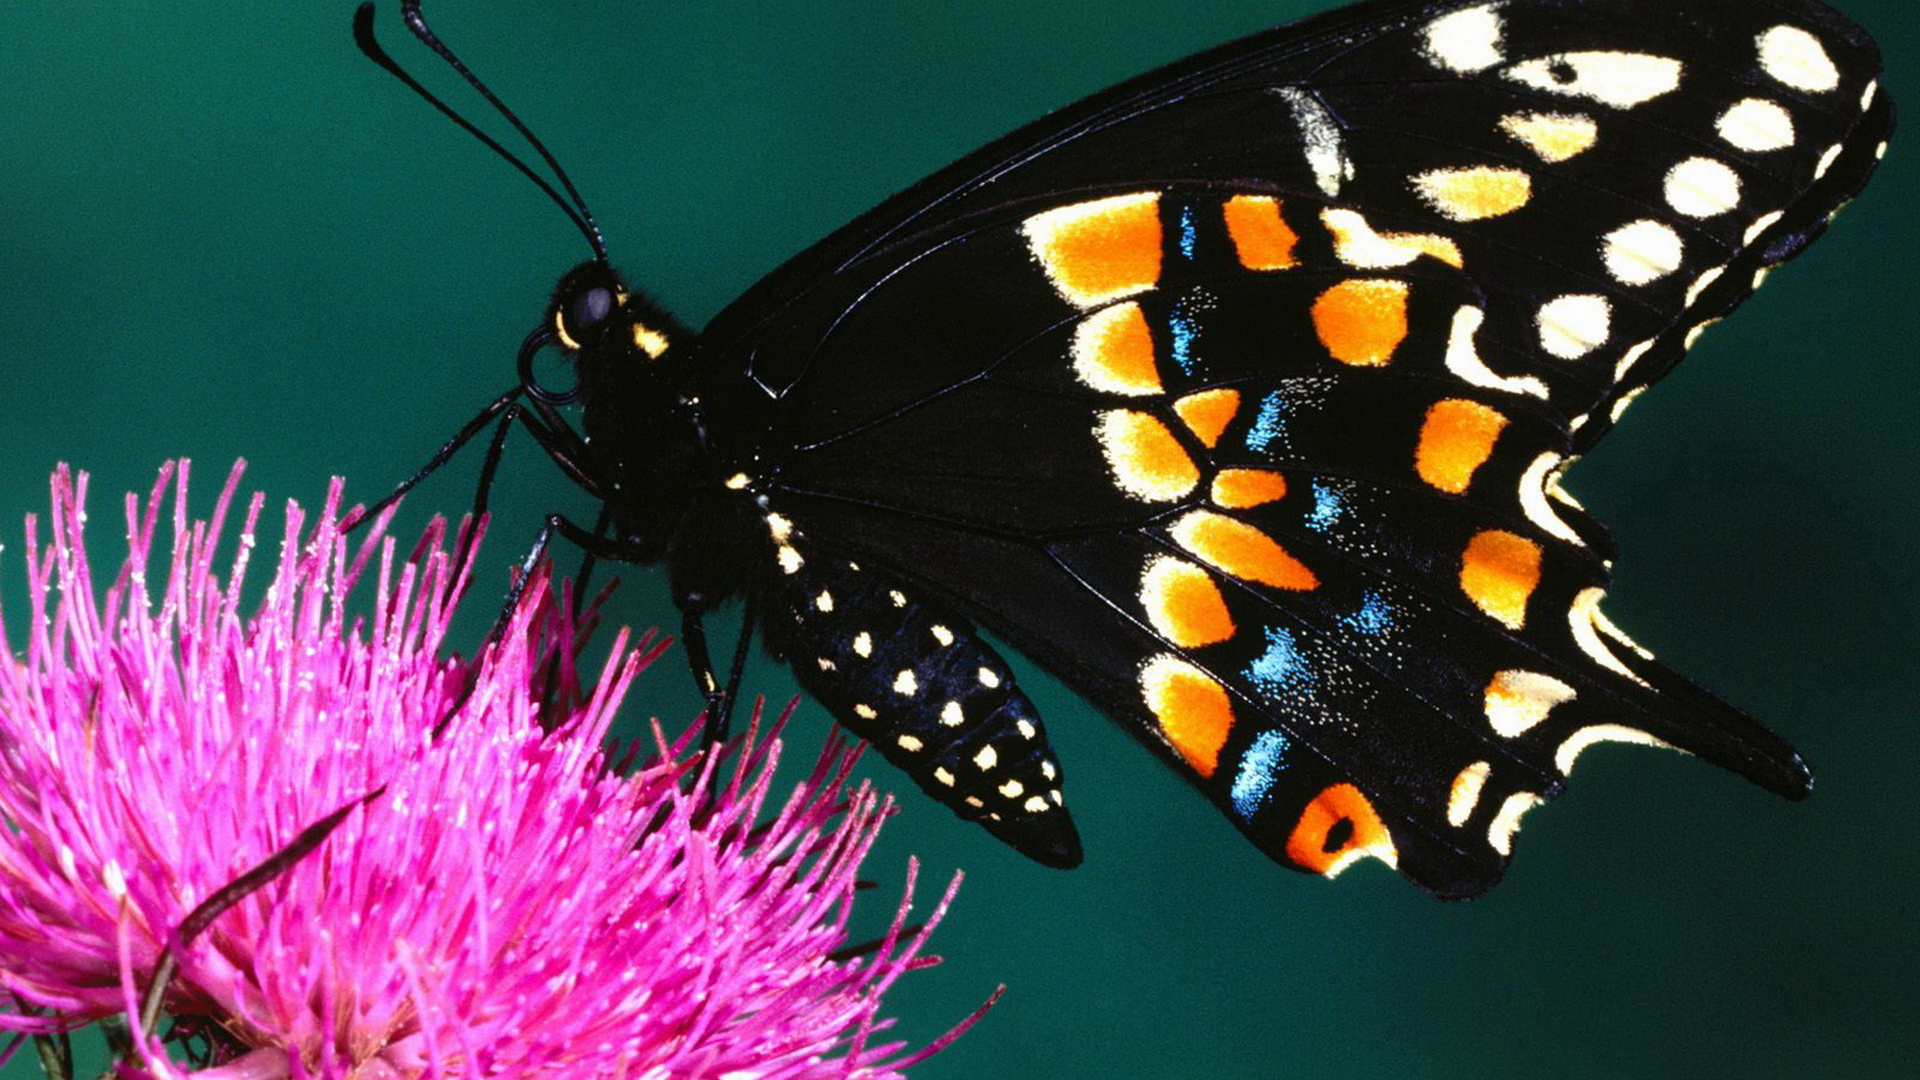 Colorful Butterfly HD Image Wallpaper